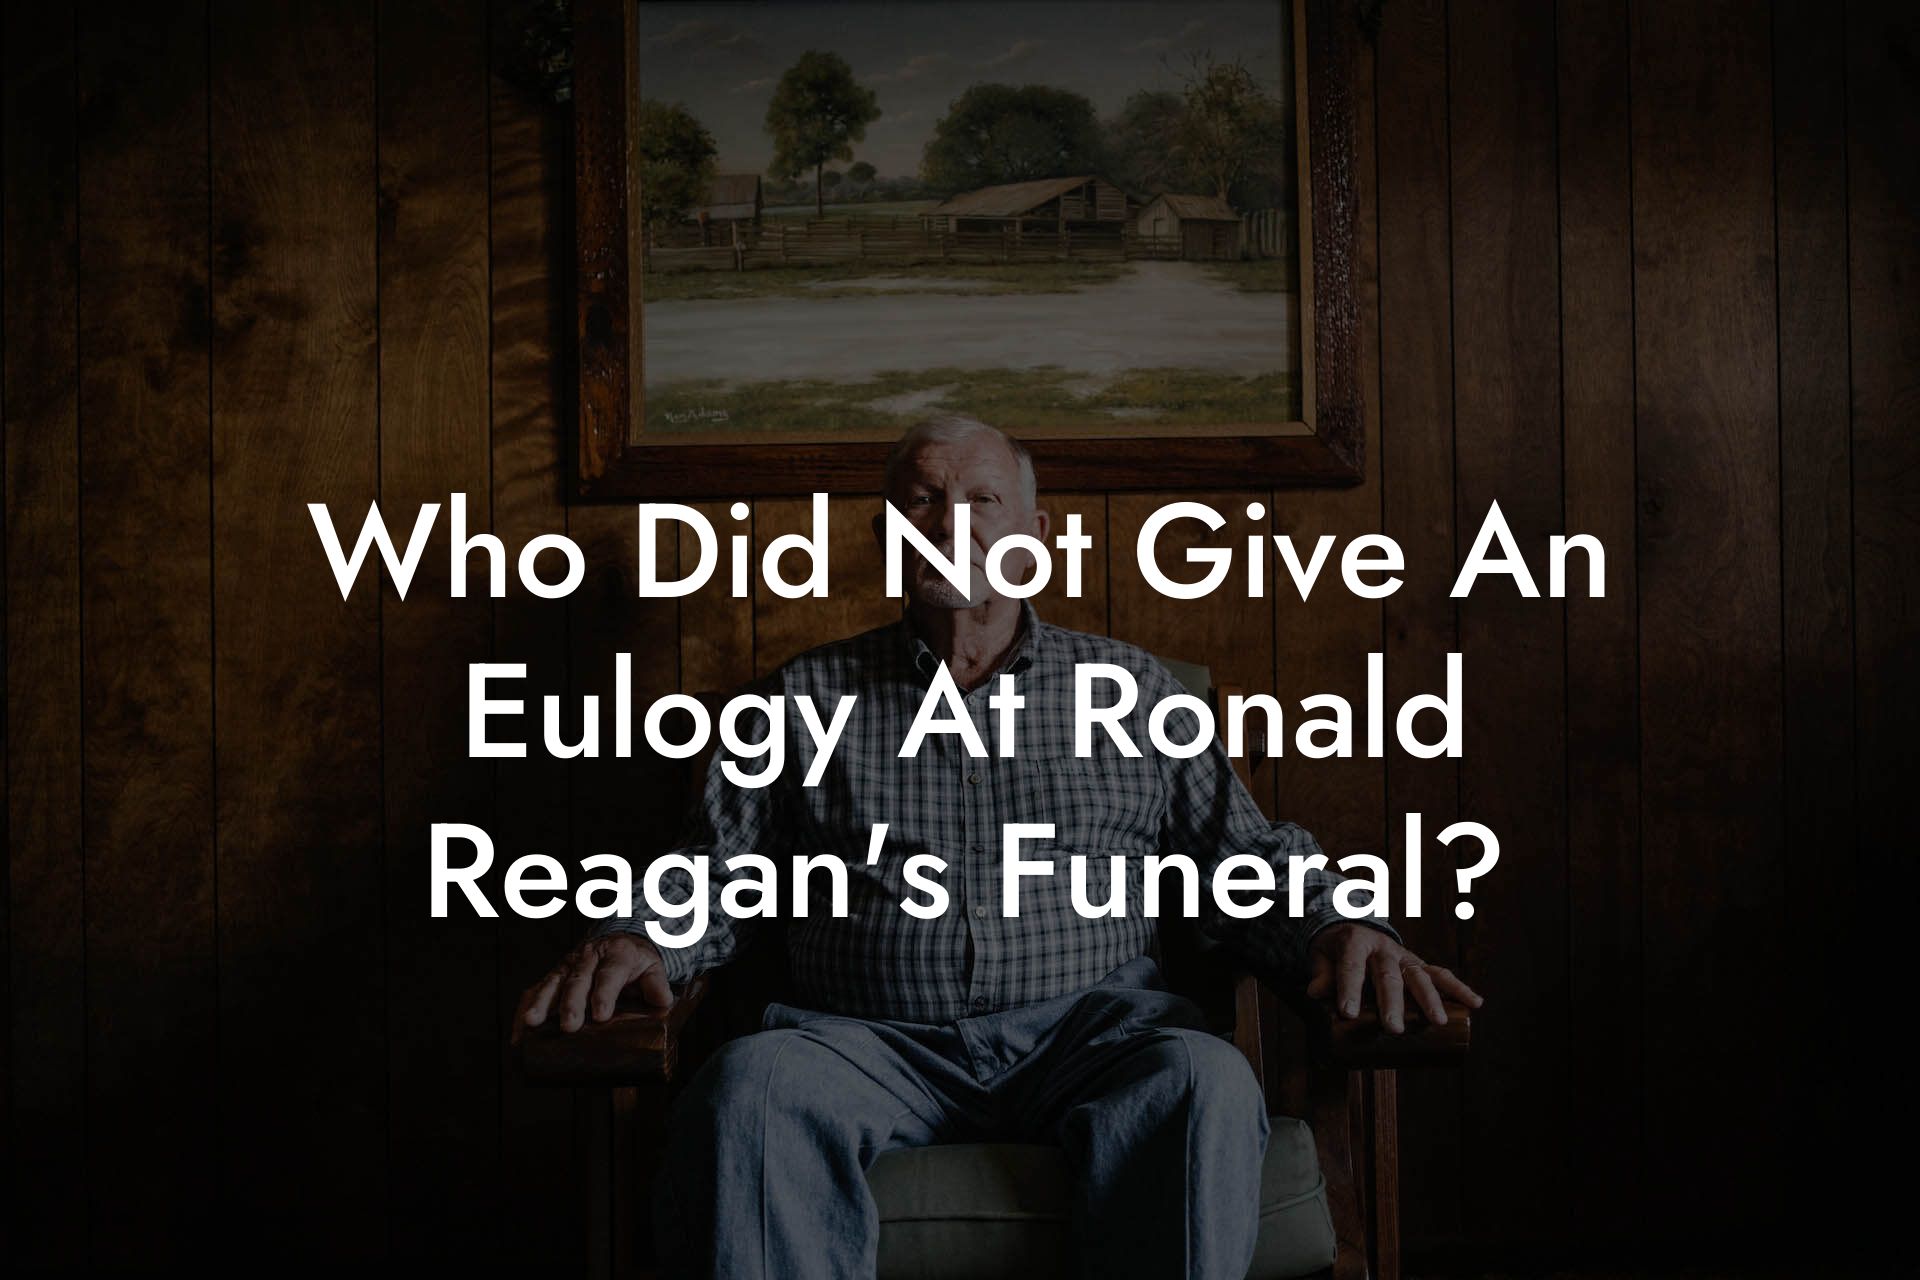 Who Did Not Give An Eulogy At Ronald Reagan's Funeral?